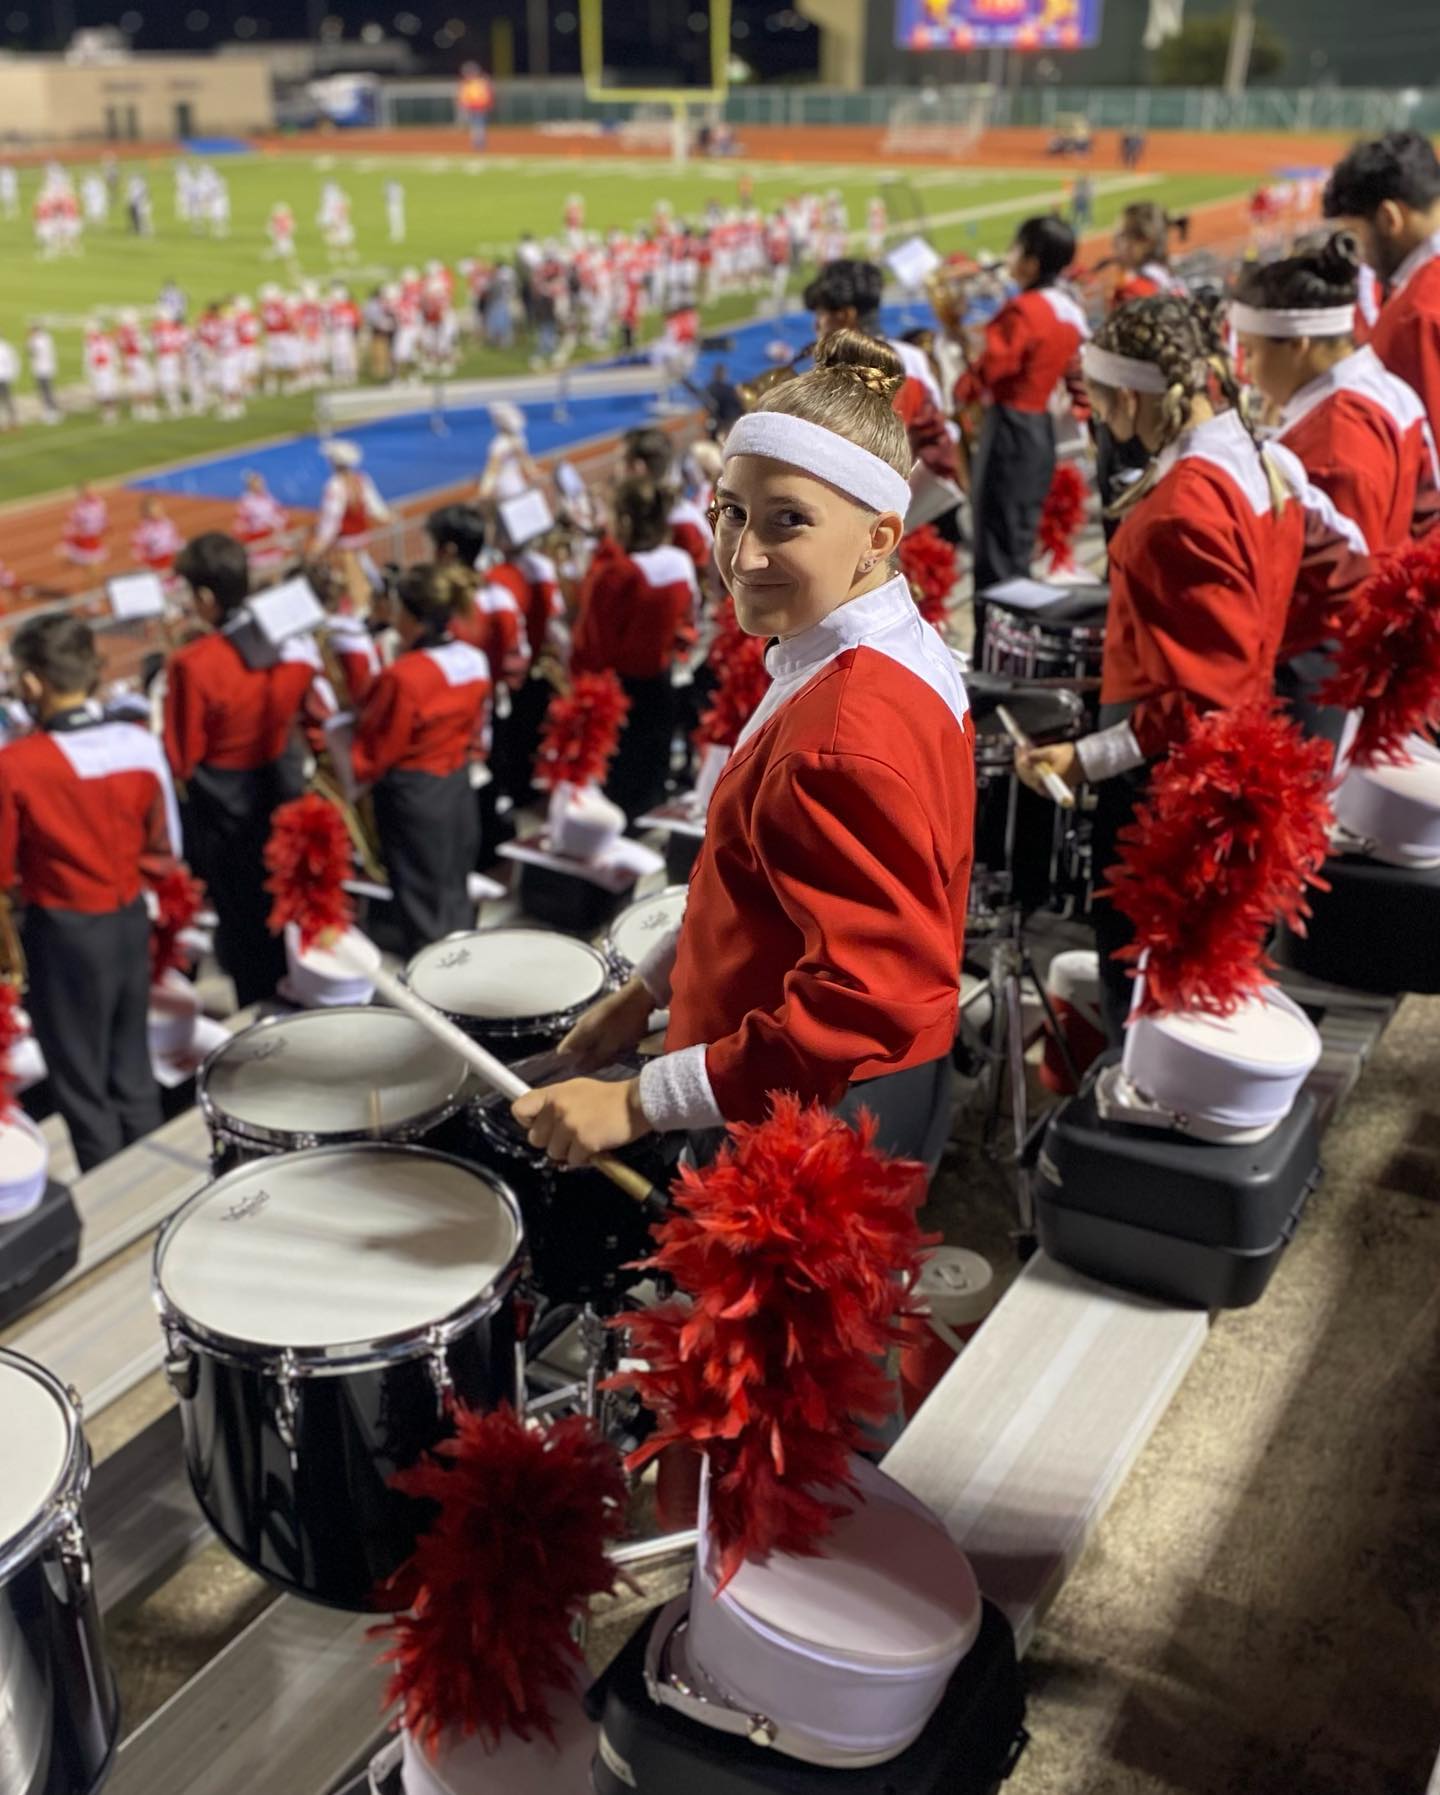 Taft band student standing on bleachers with drums at football game